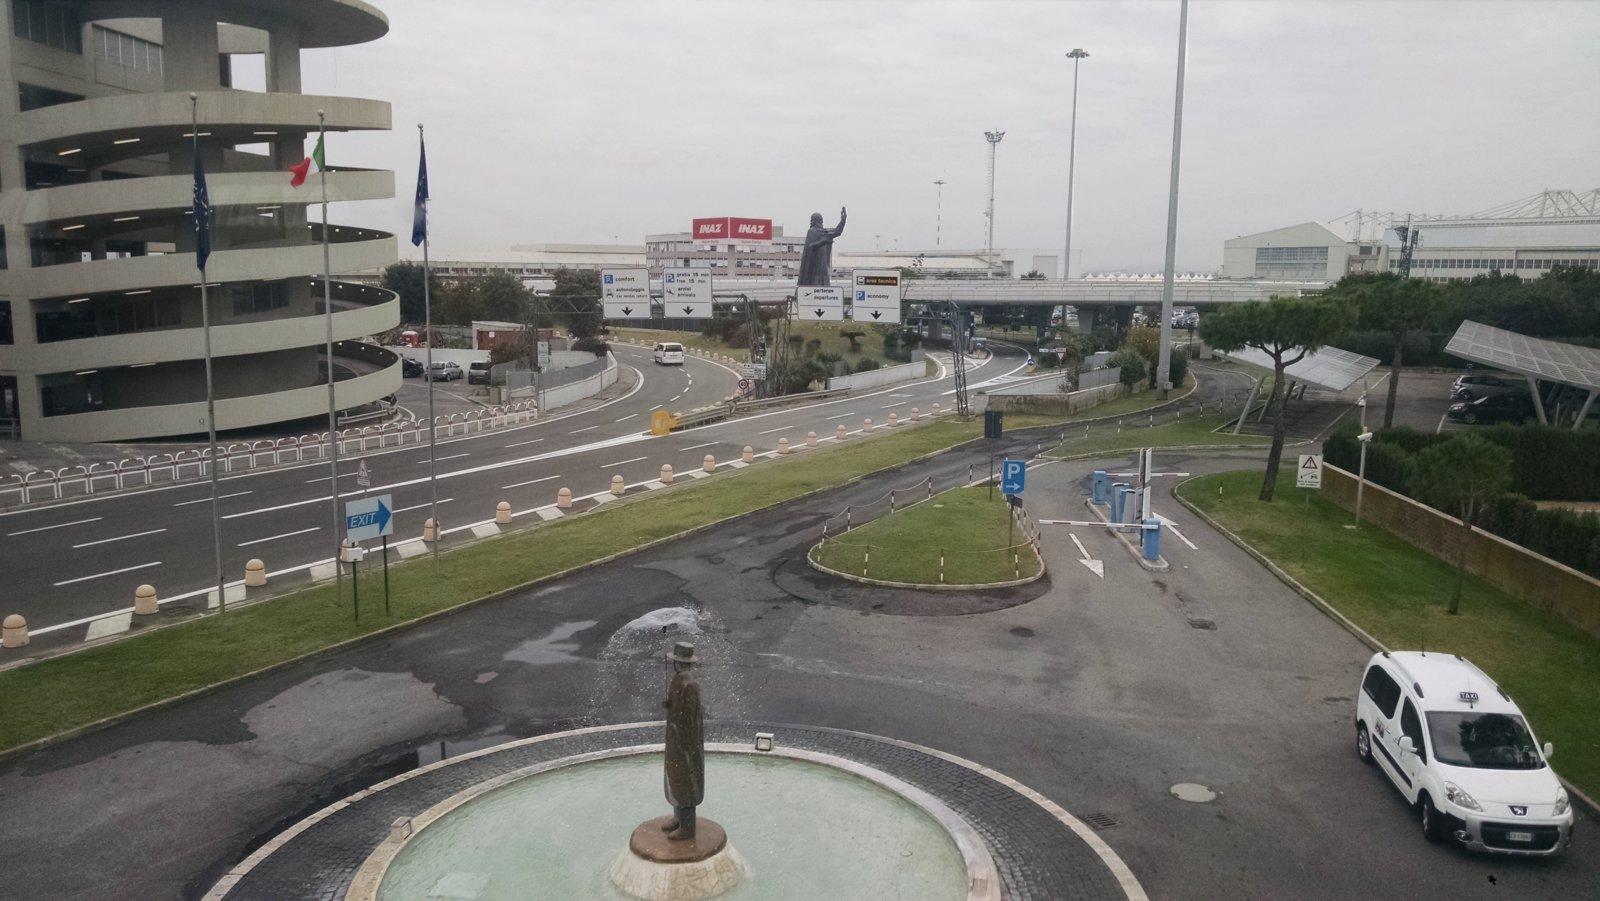 The Leonardo Da Vinci Statue at the airport could be seen with his upraised arm slightly in the distance. 